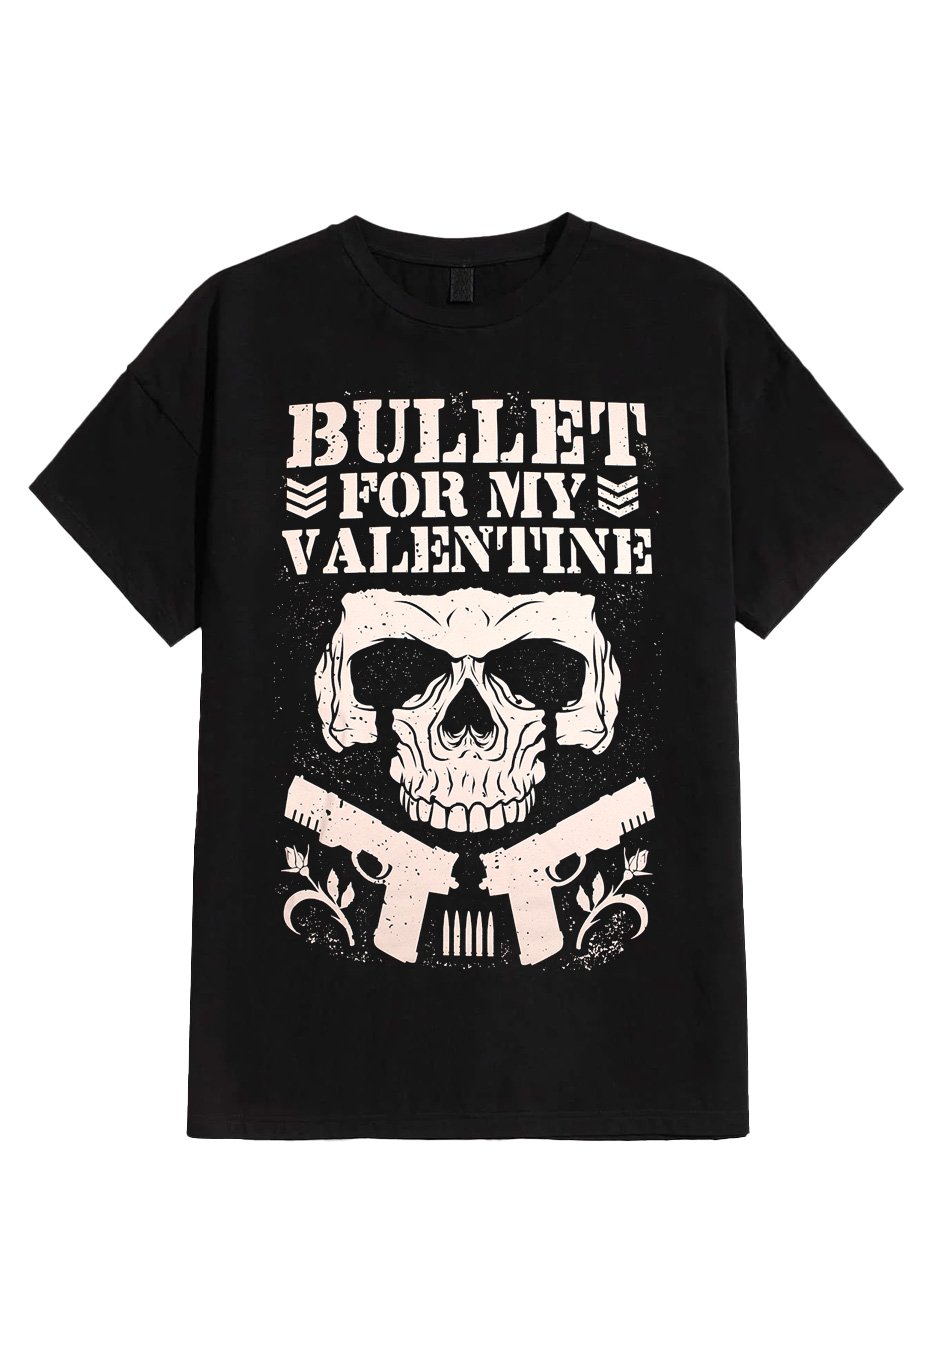 Bullet For My Valentine - Bullet Club - T-Shirt